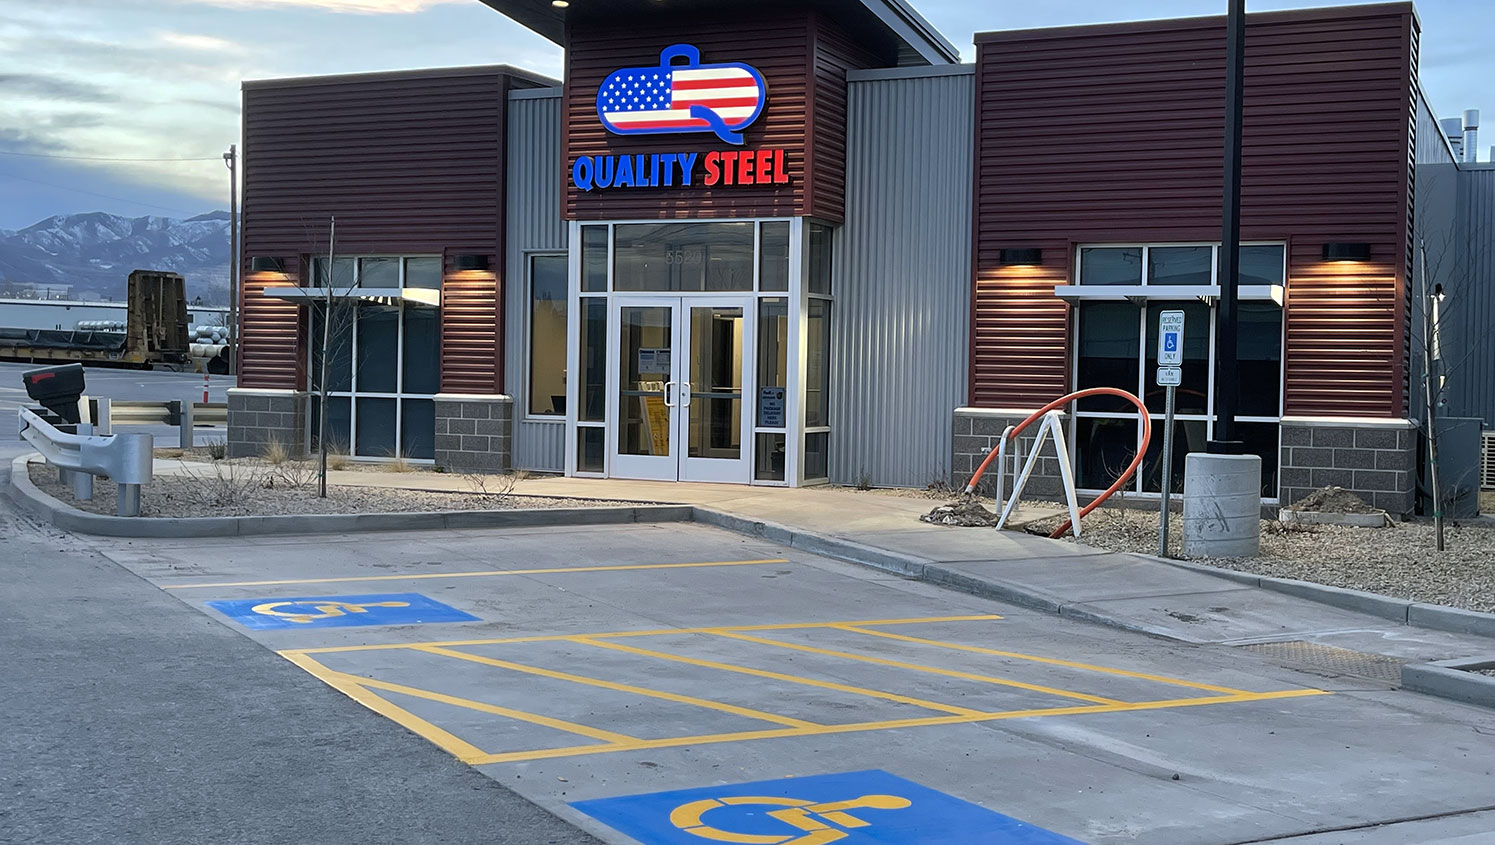 re-striped ADA compliant parking stalls